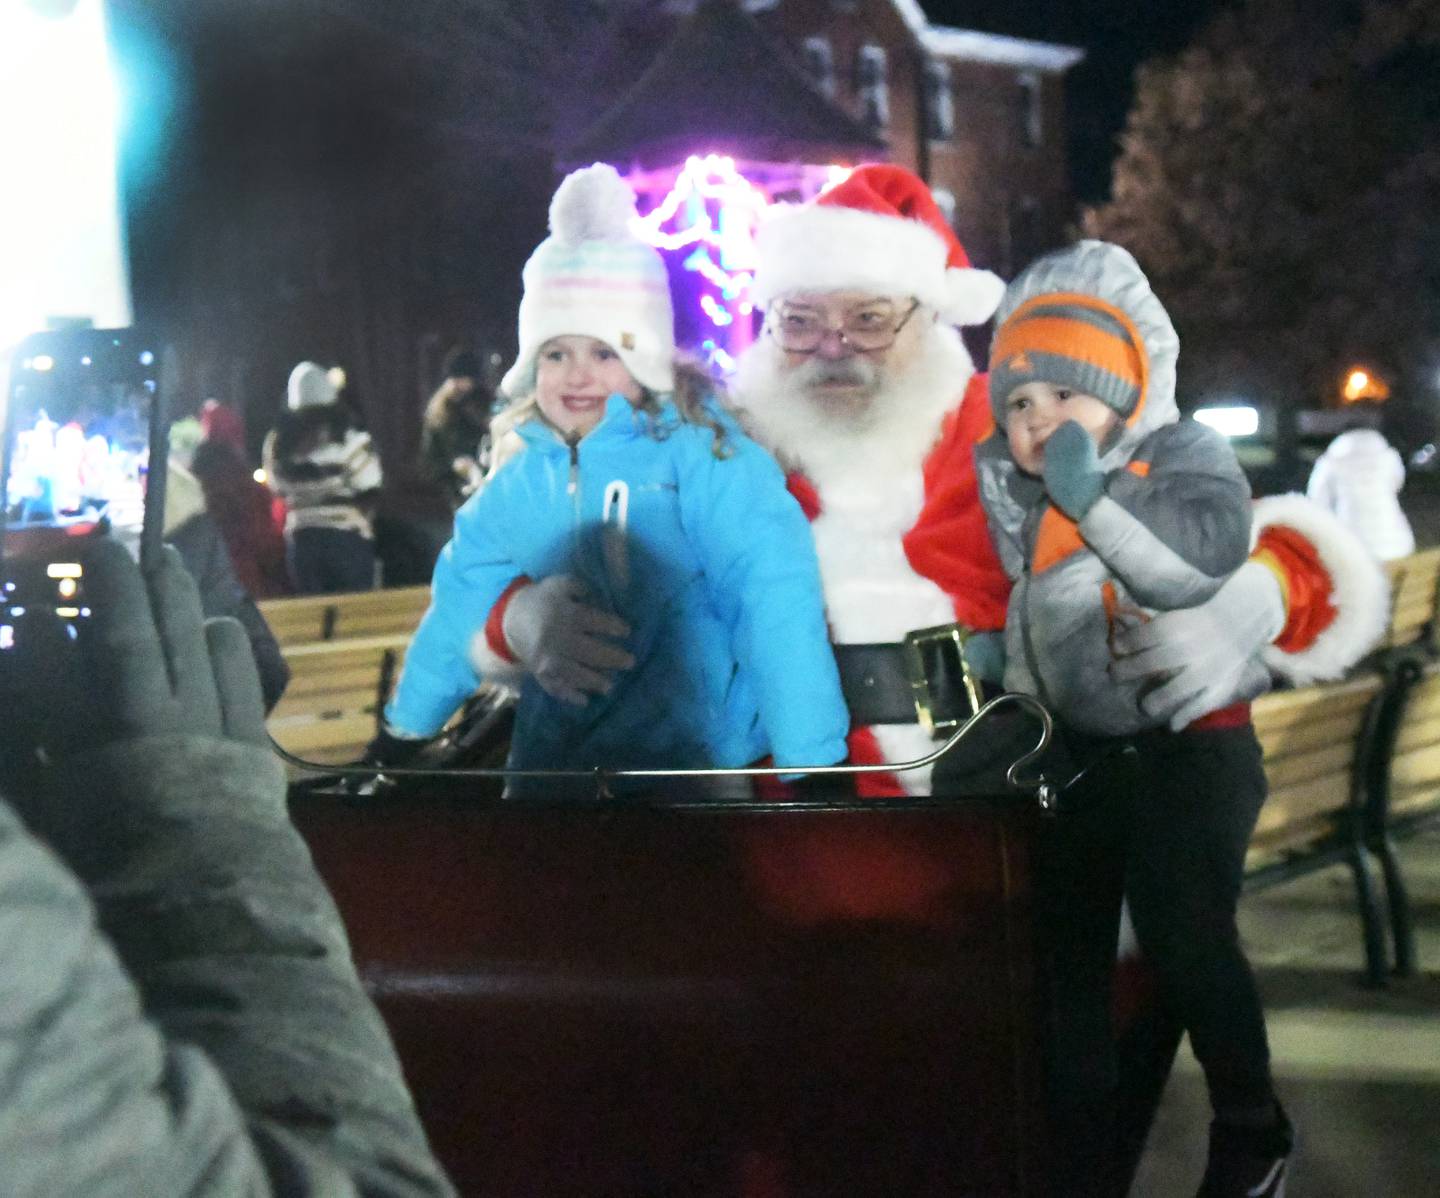 Eden and Luke White sit with Santa Claus at Mt. Morris' Festival of Lights on Dec.3. A visit with Santa was the main attraction at this year's event.